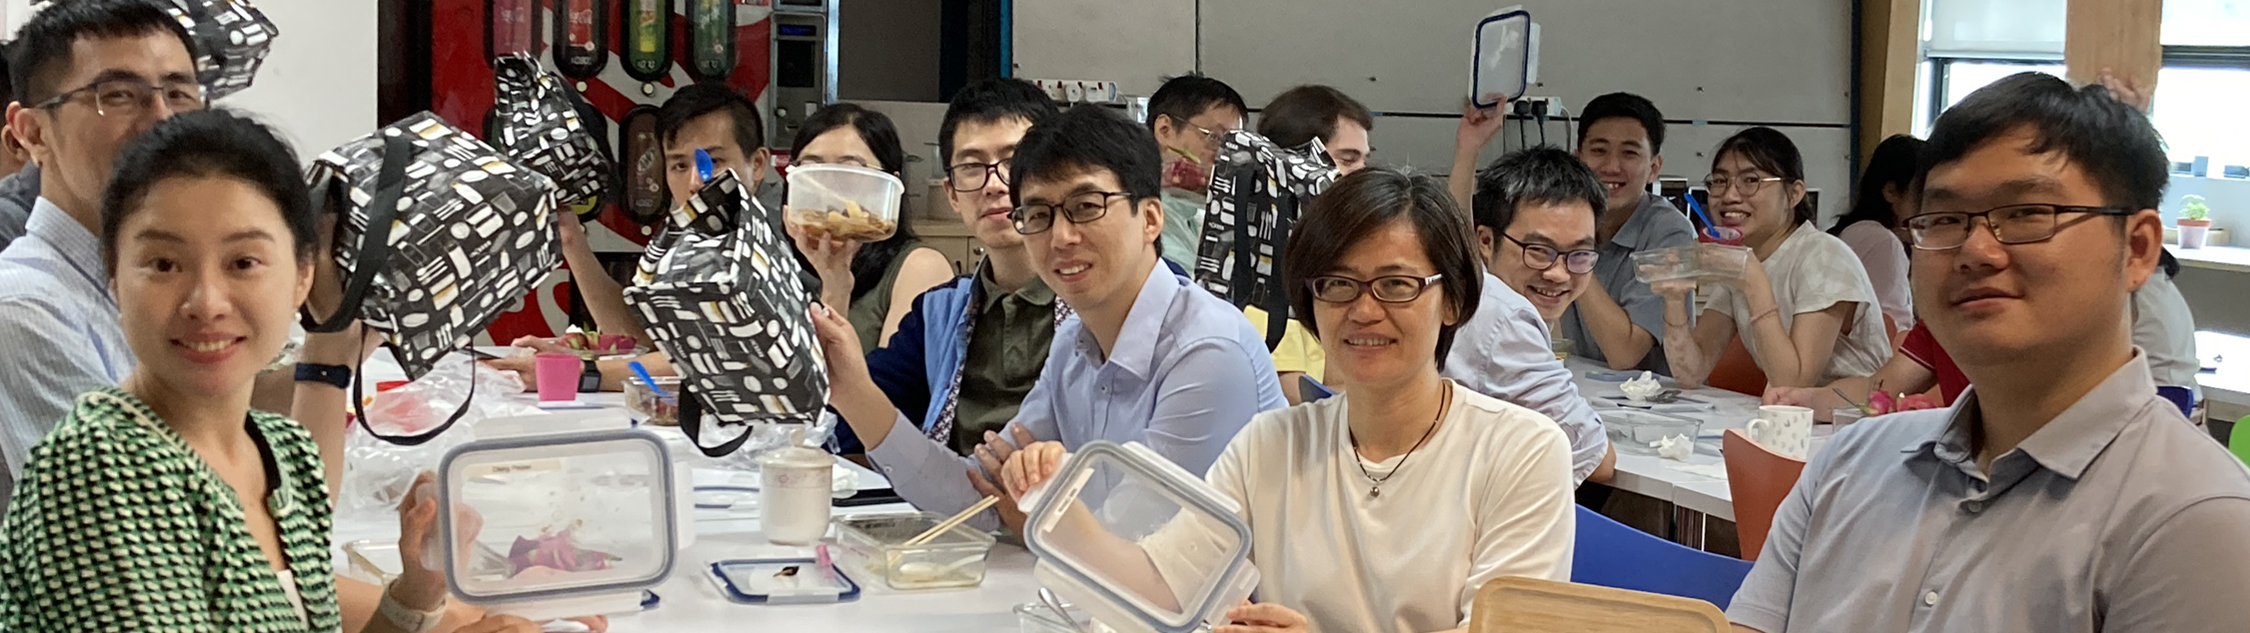 CGG Singapore team showing off new lunchboxes